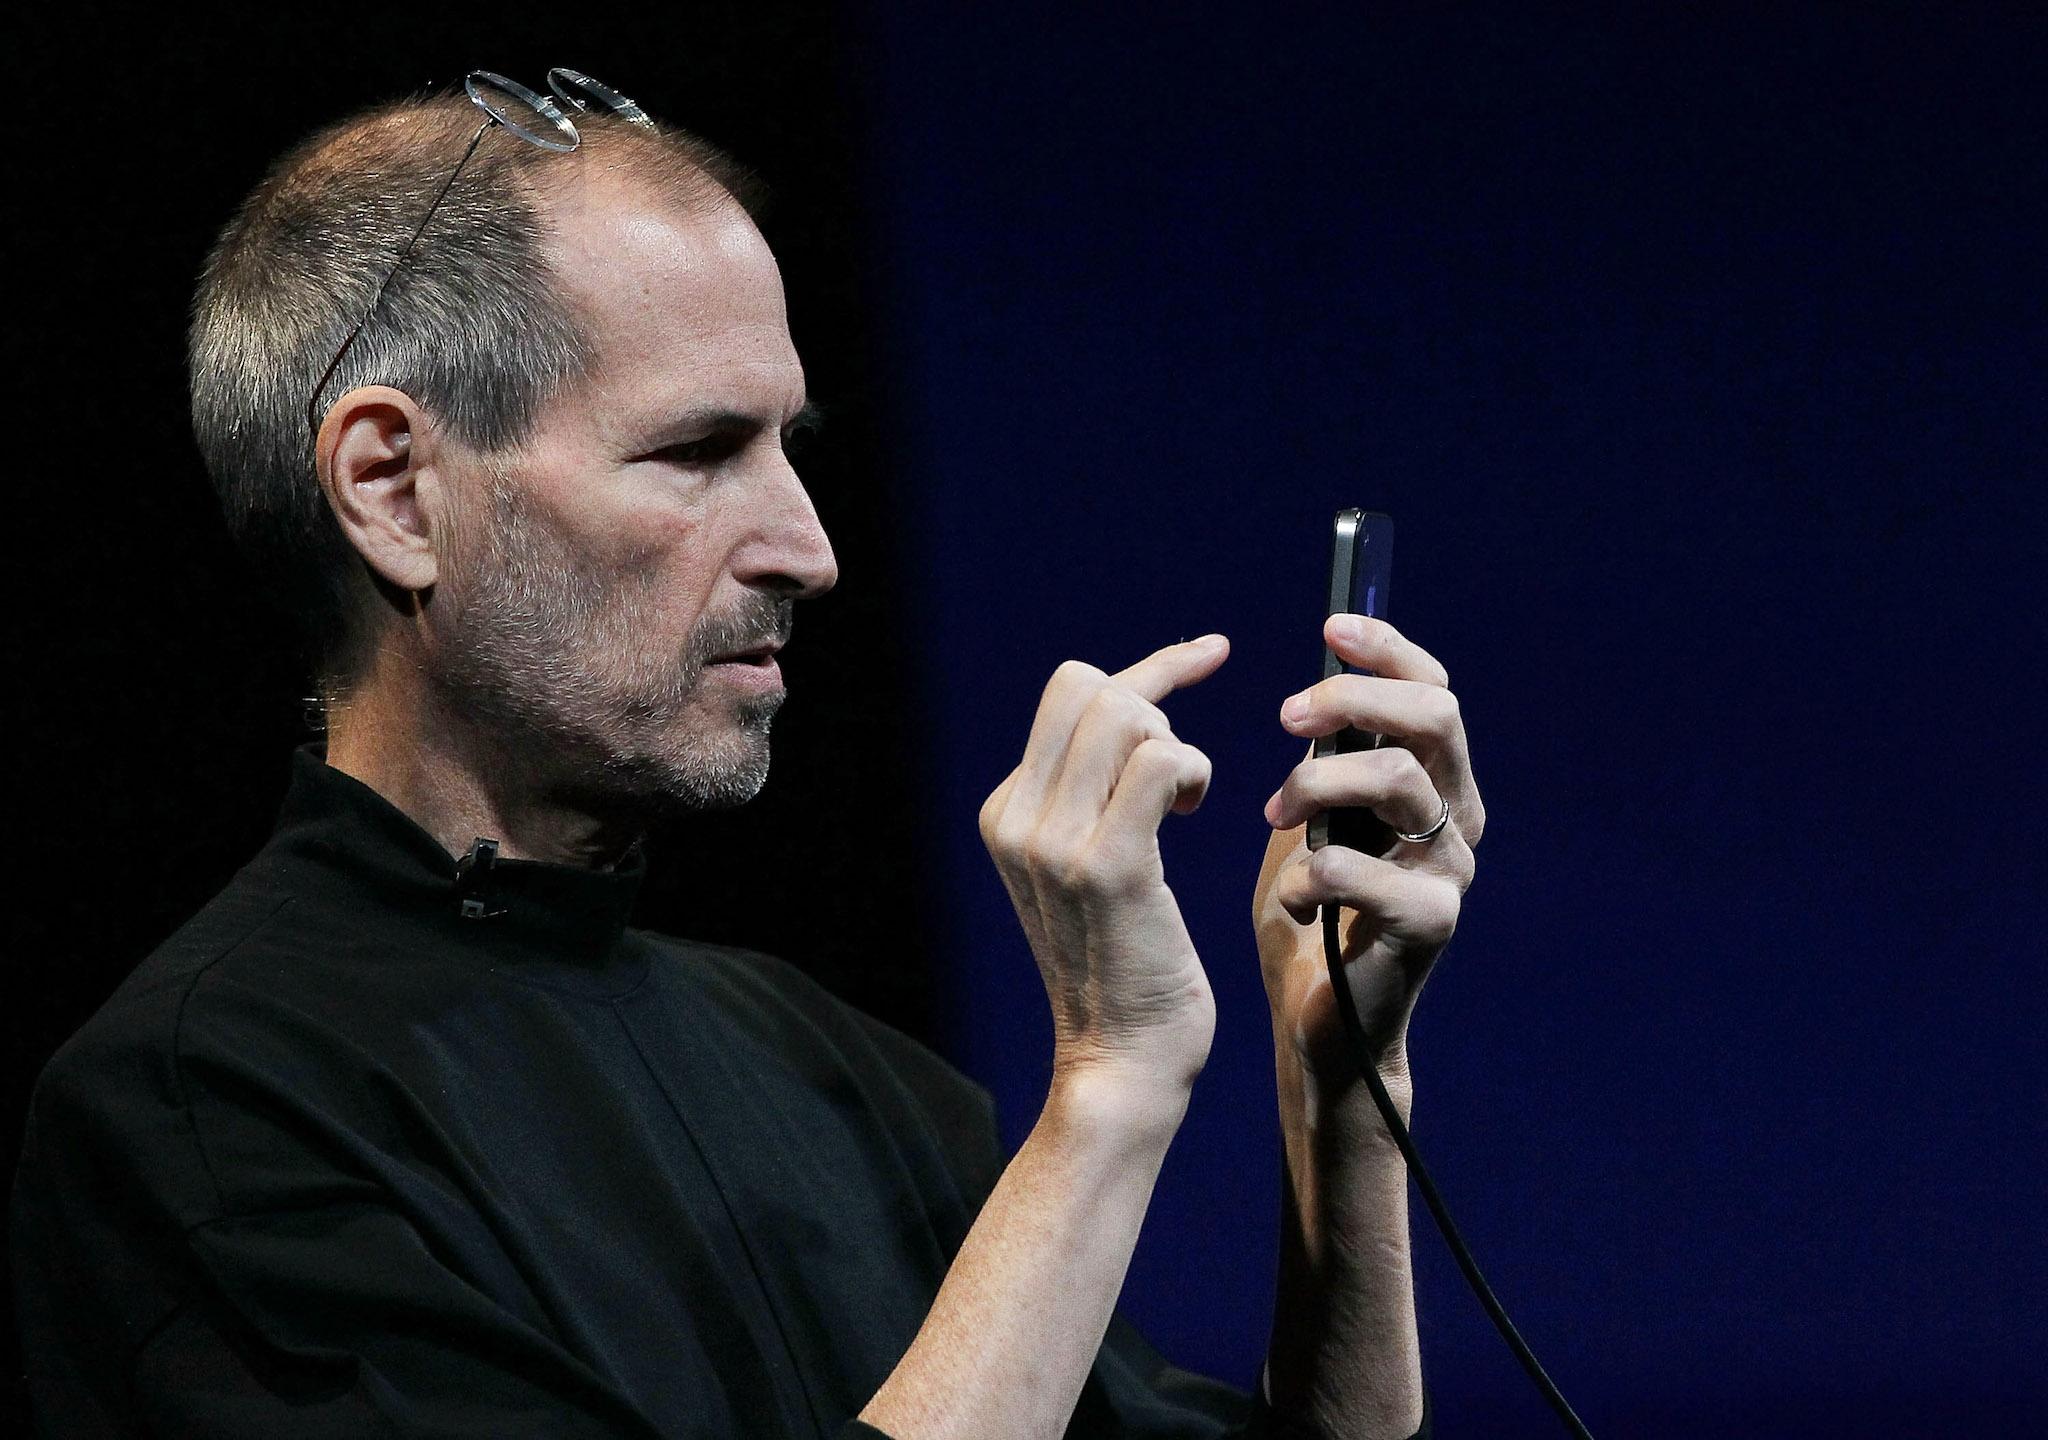 Steve Jobs knew passion and a shared vision were crucial to the success of Apple